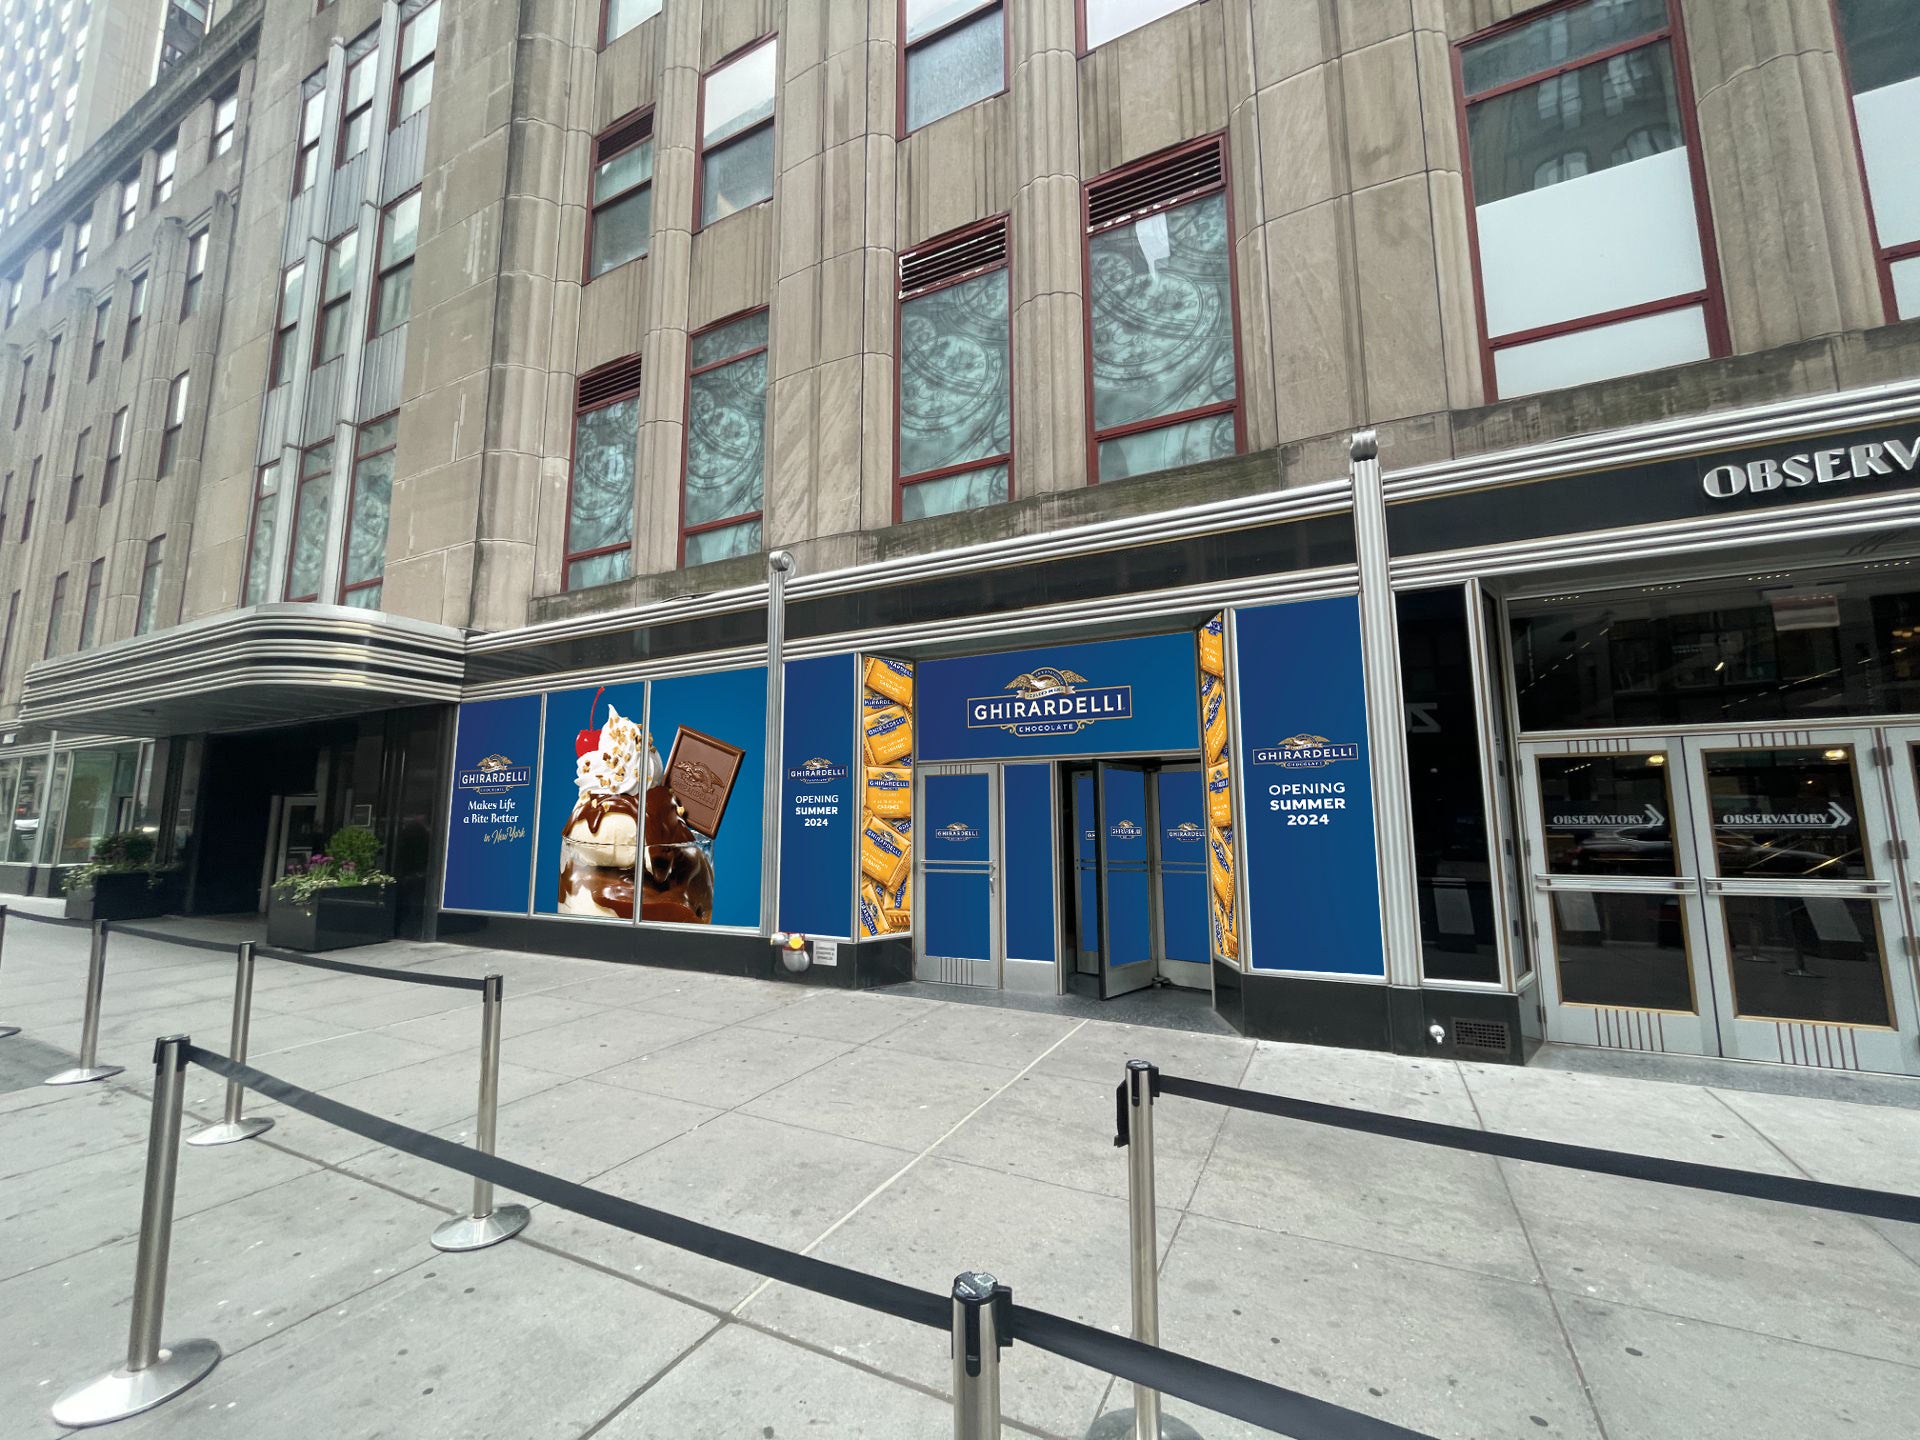 Empire State Realty Trust Welcomes Ghirardelli’s First-Ever New York Store to Its Retail Portfolio at the Empire State Building